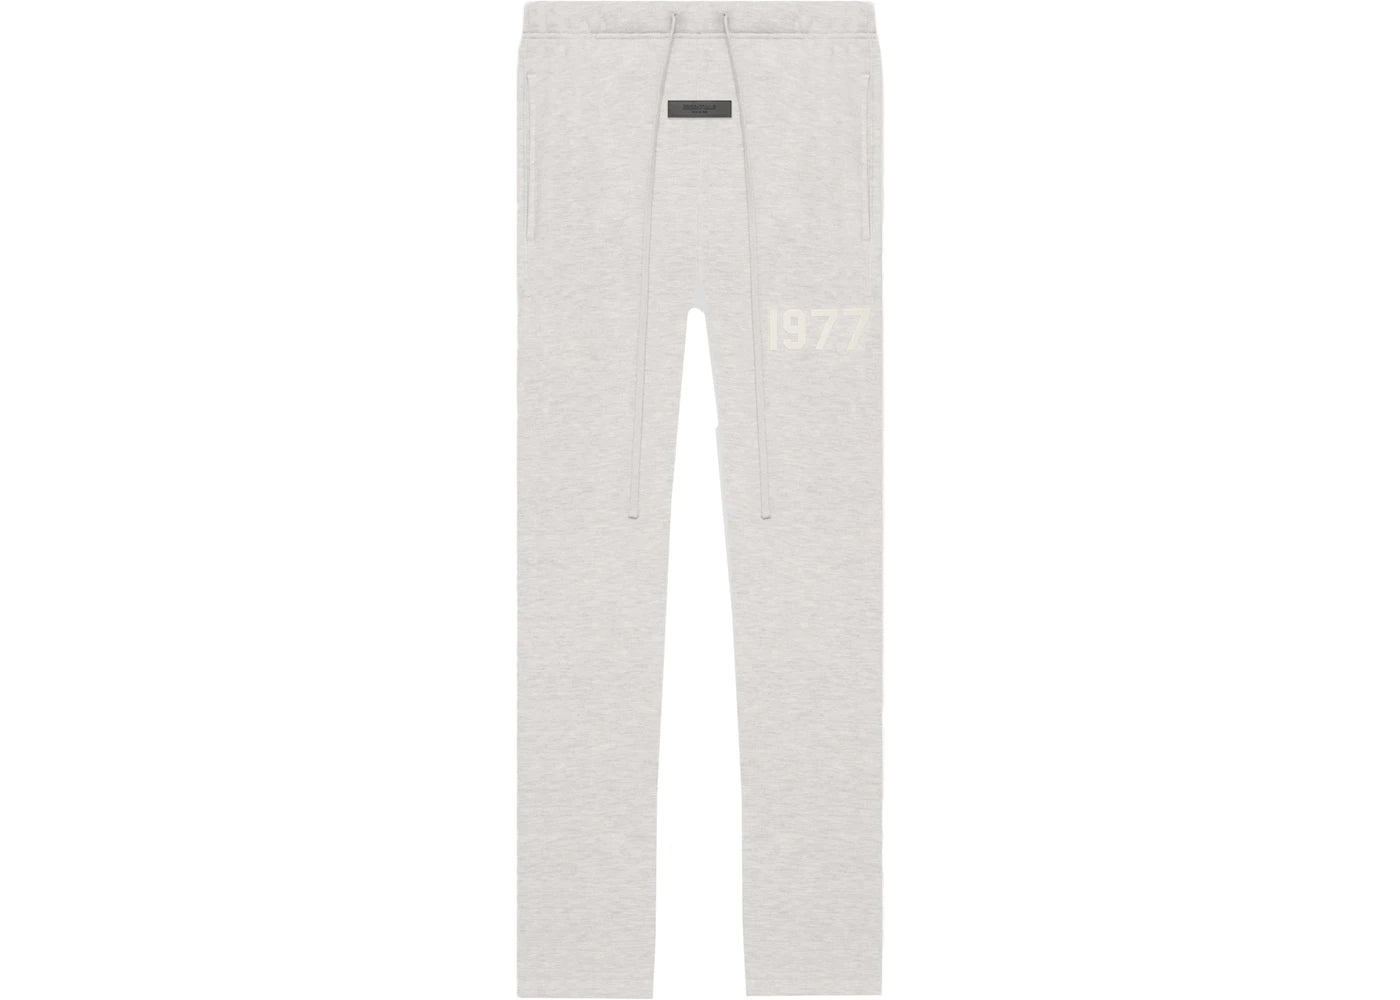 Fear Of God Essentials Relaxed Sweatpants - Light Oatmeal